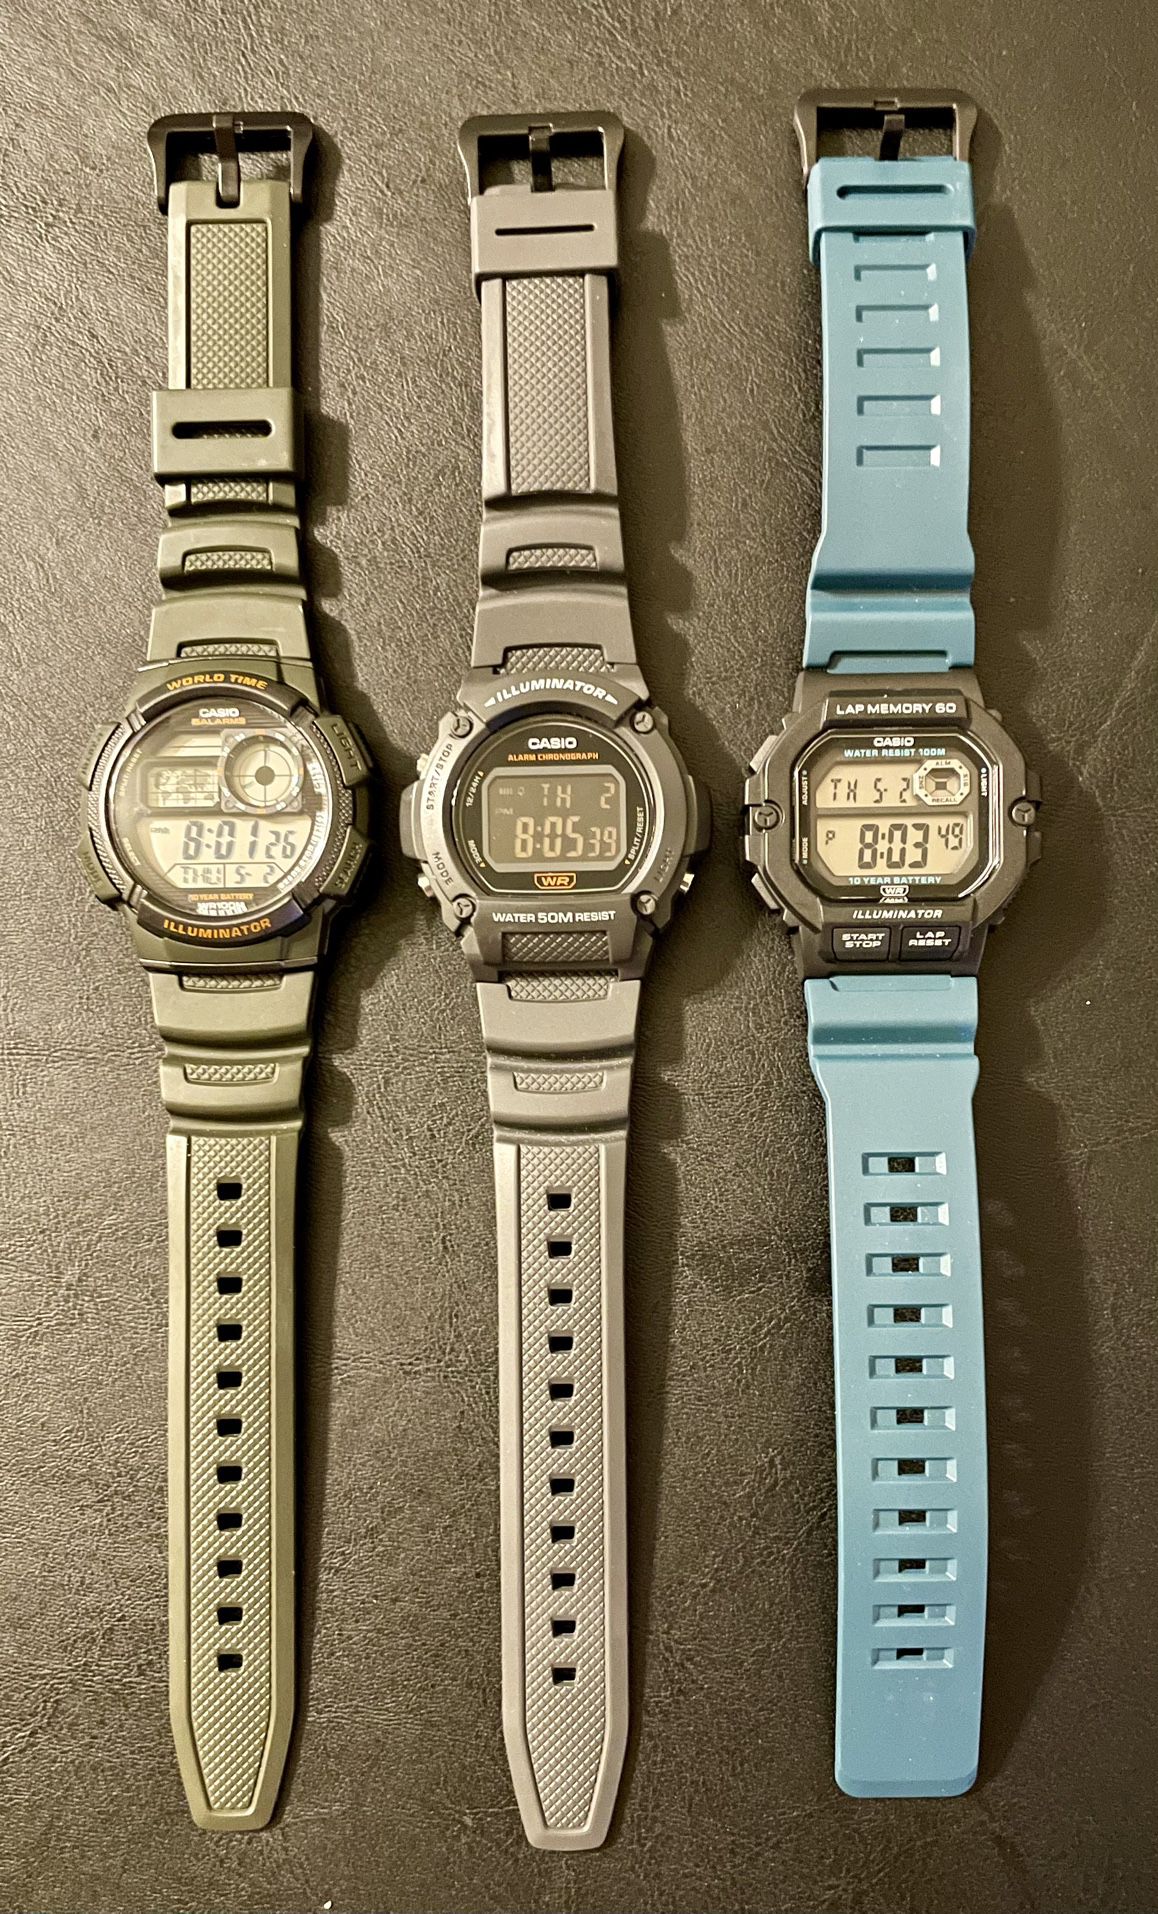 Casio Watches… 3 For $16